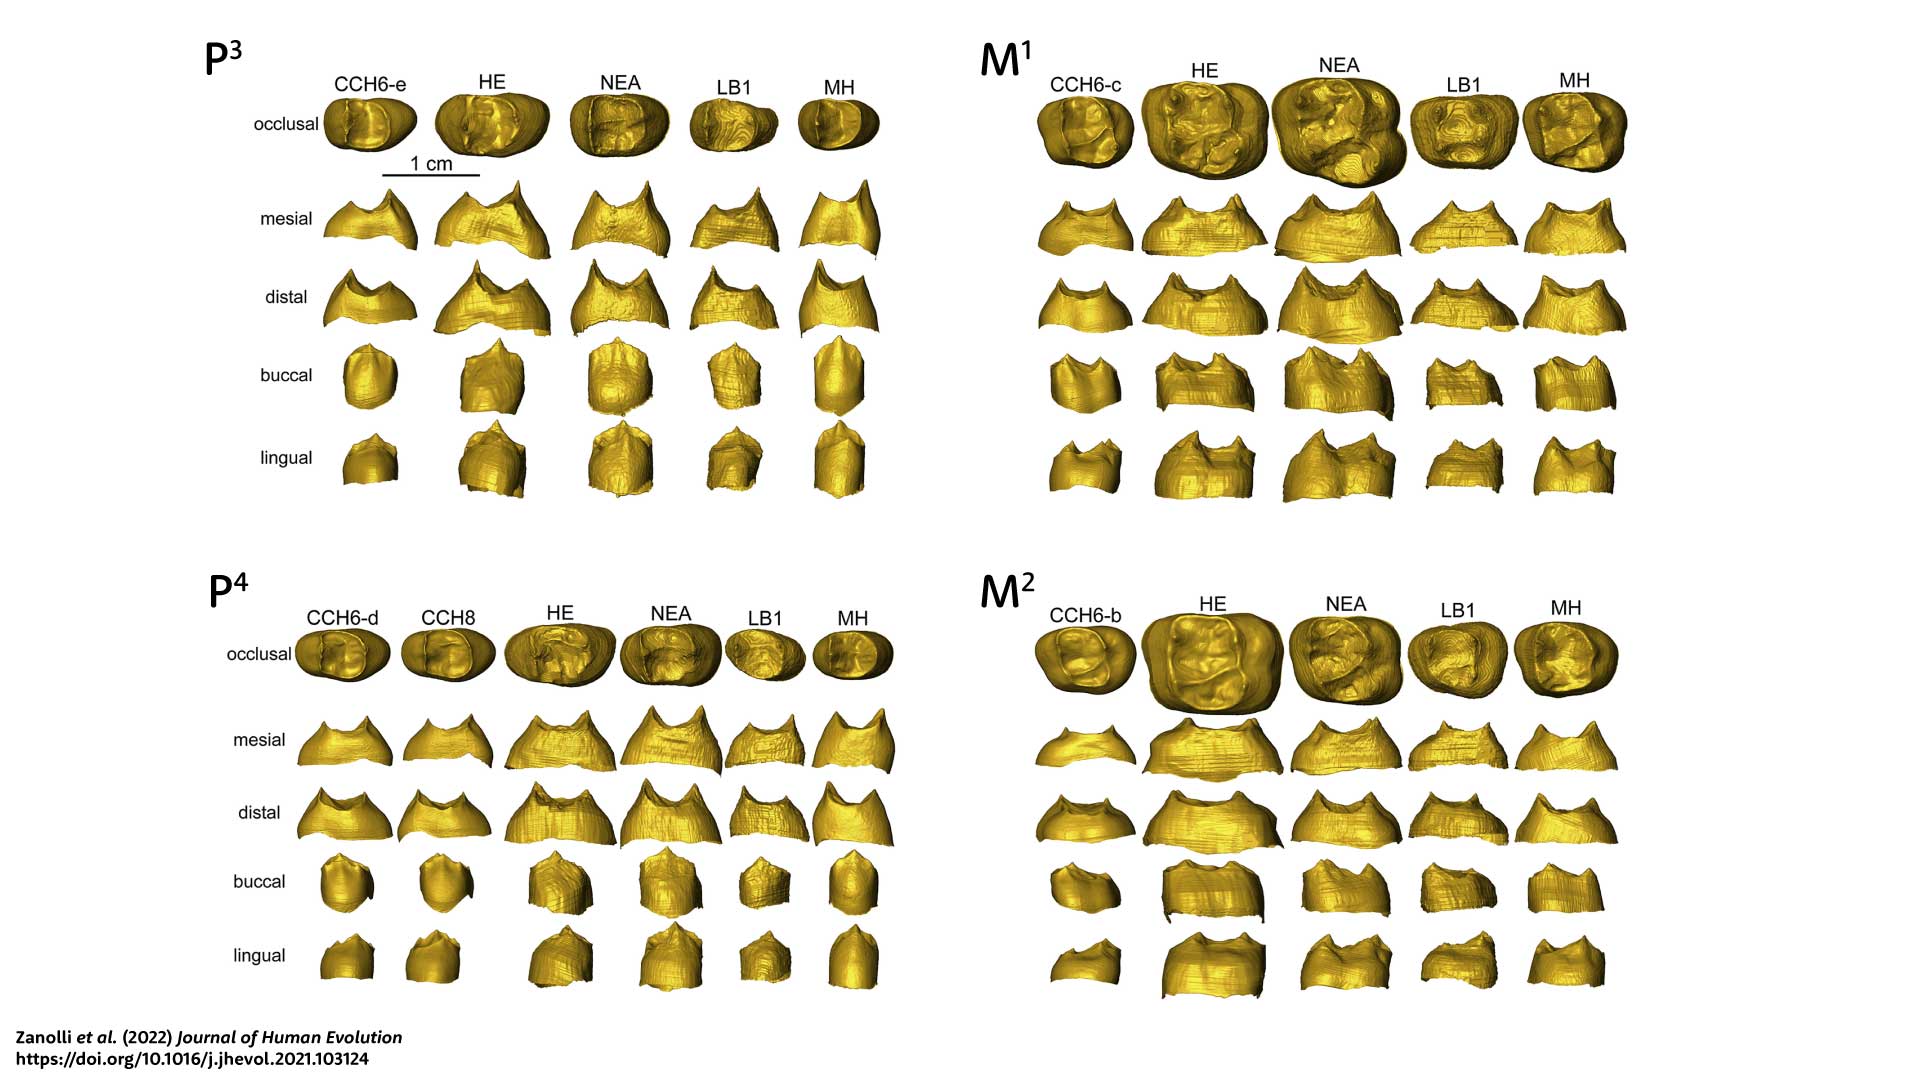 An array of images of the enamel-dentin junction for five or six teeth in four tooth classes. 